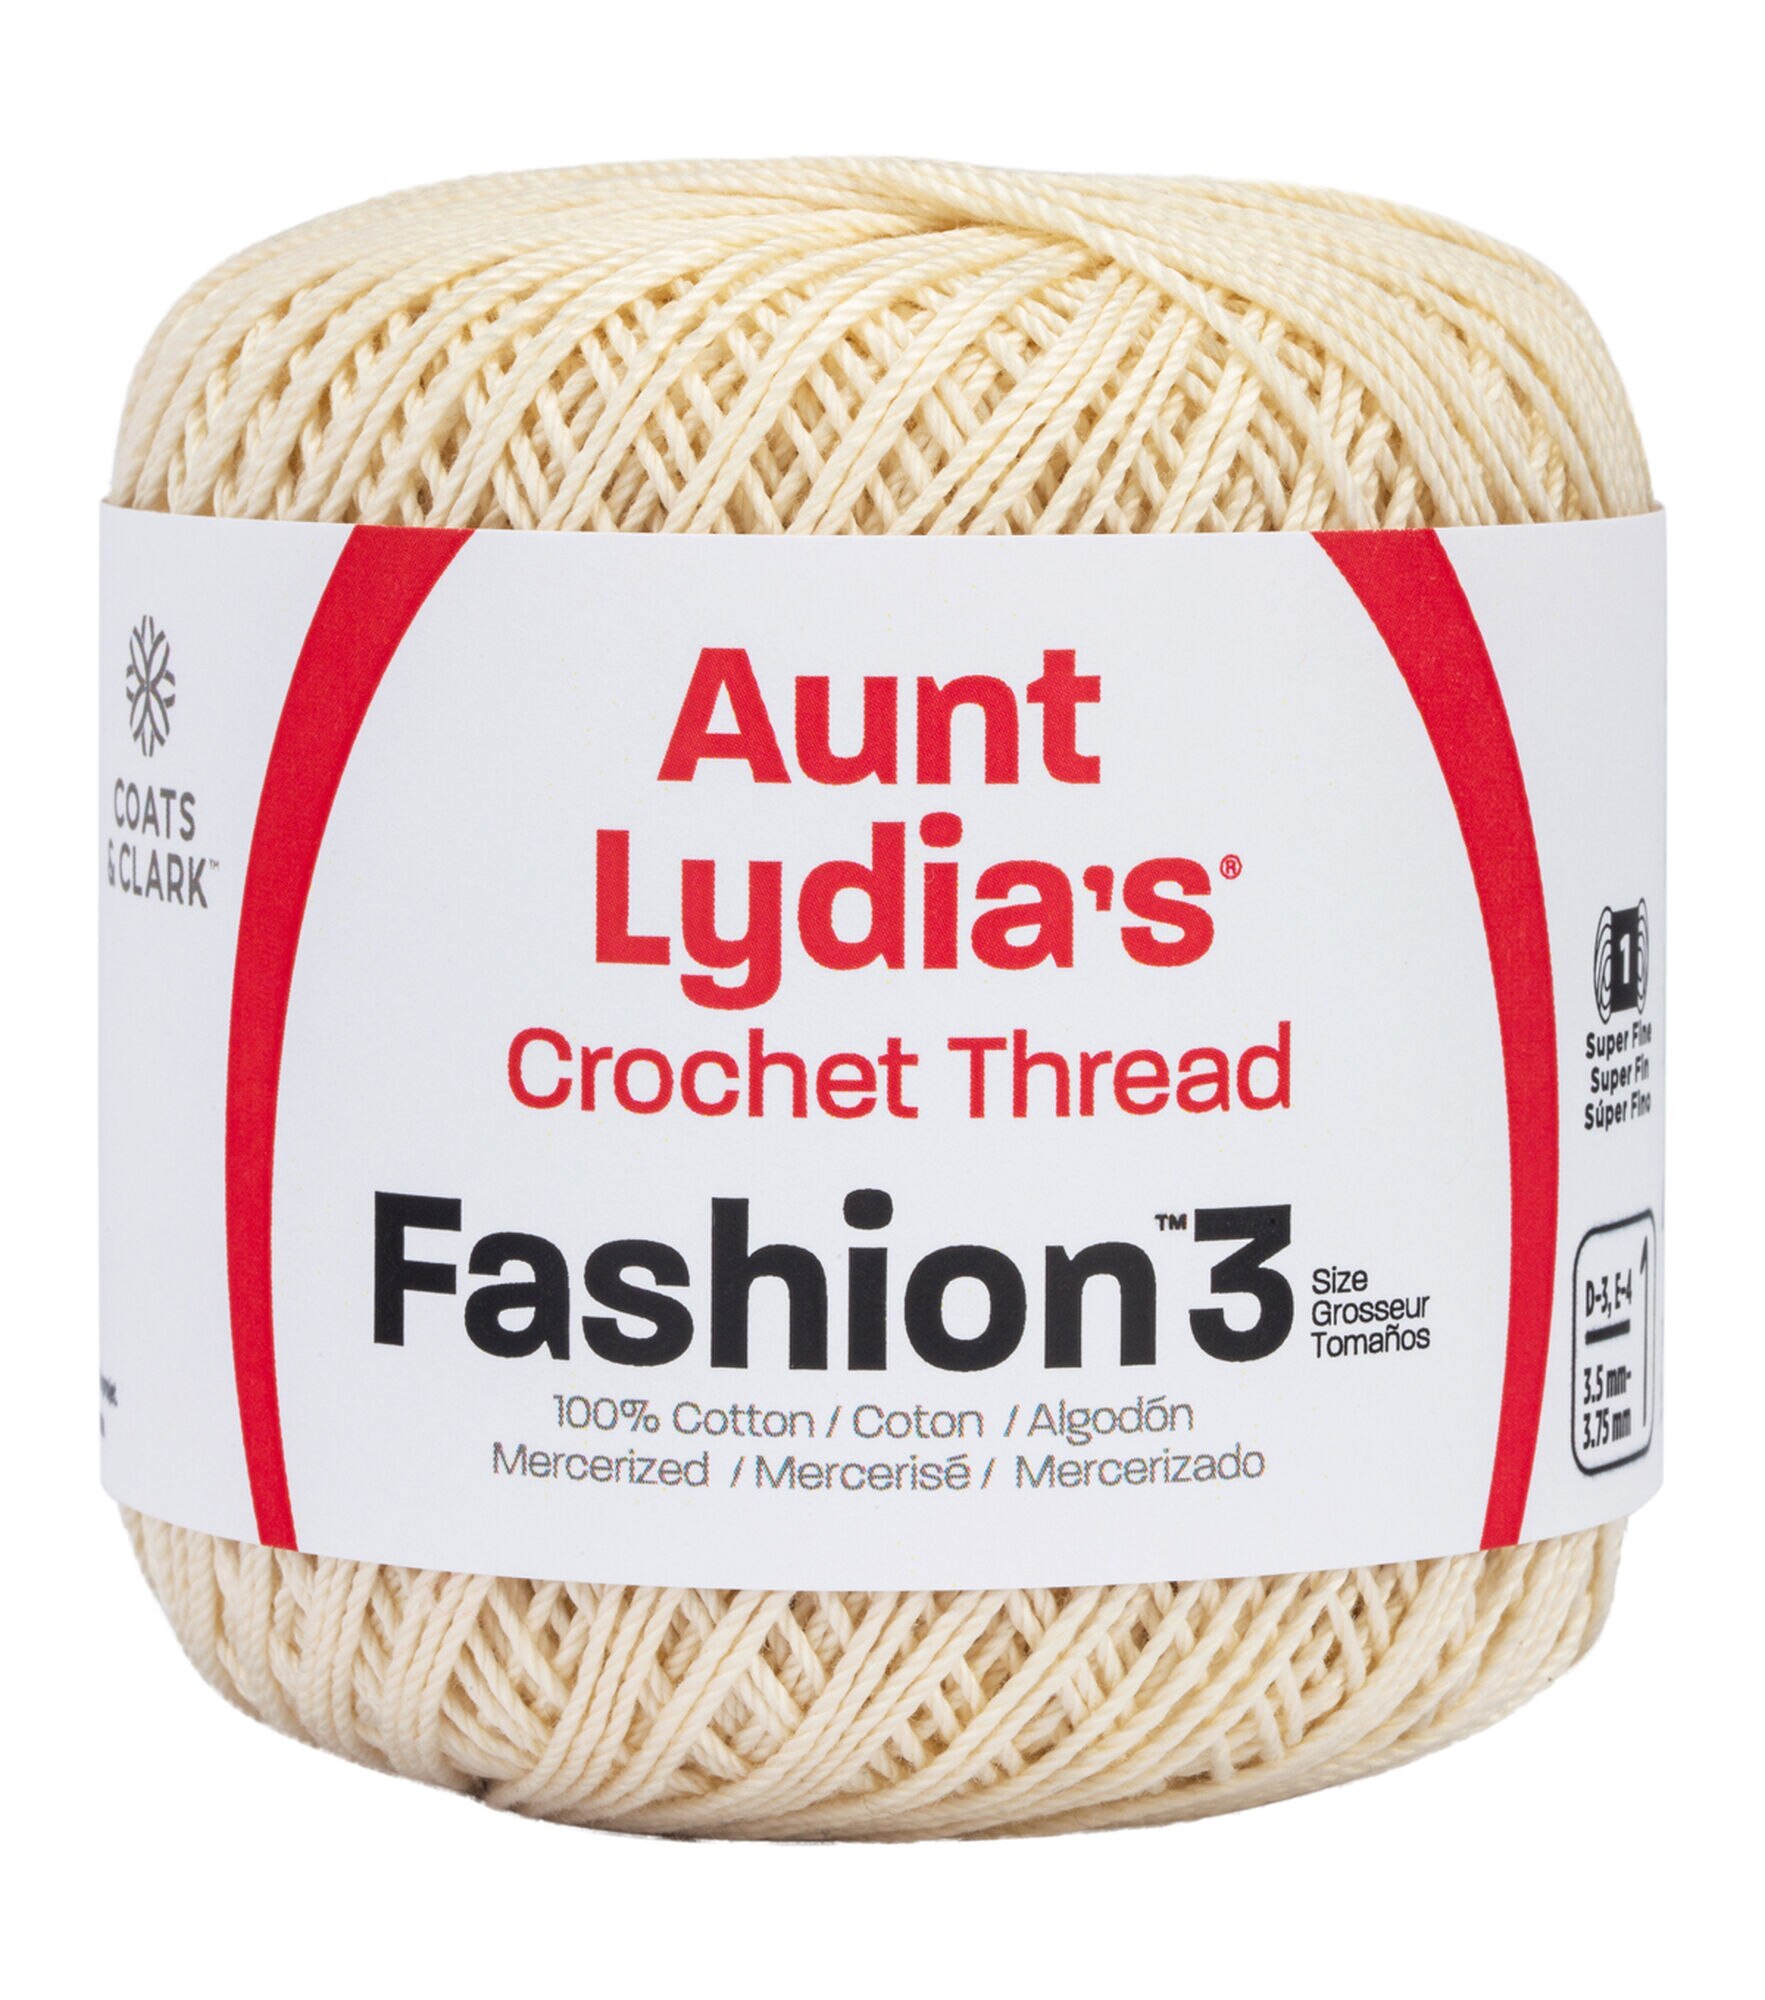 Aunt Lydia's Fashion Crochet Thread Size 3-Scarlet, 1 count